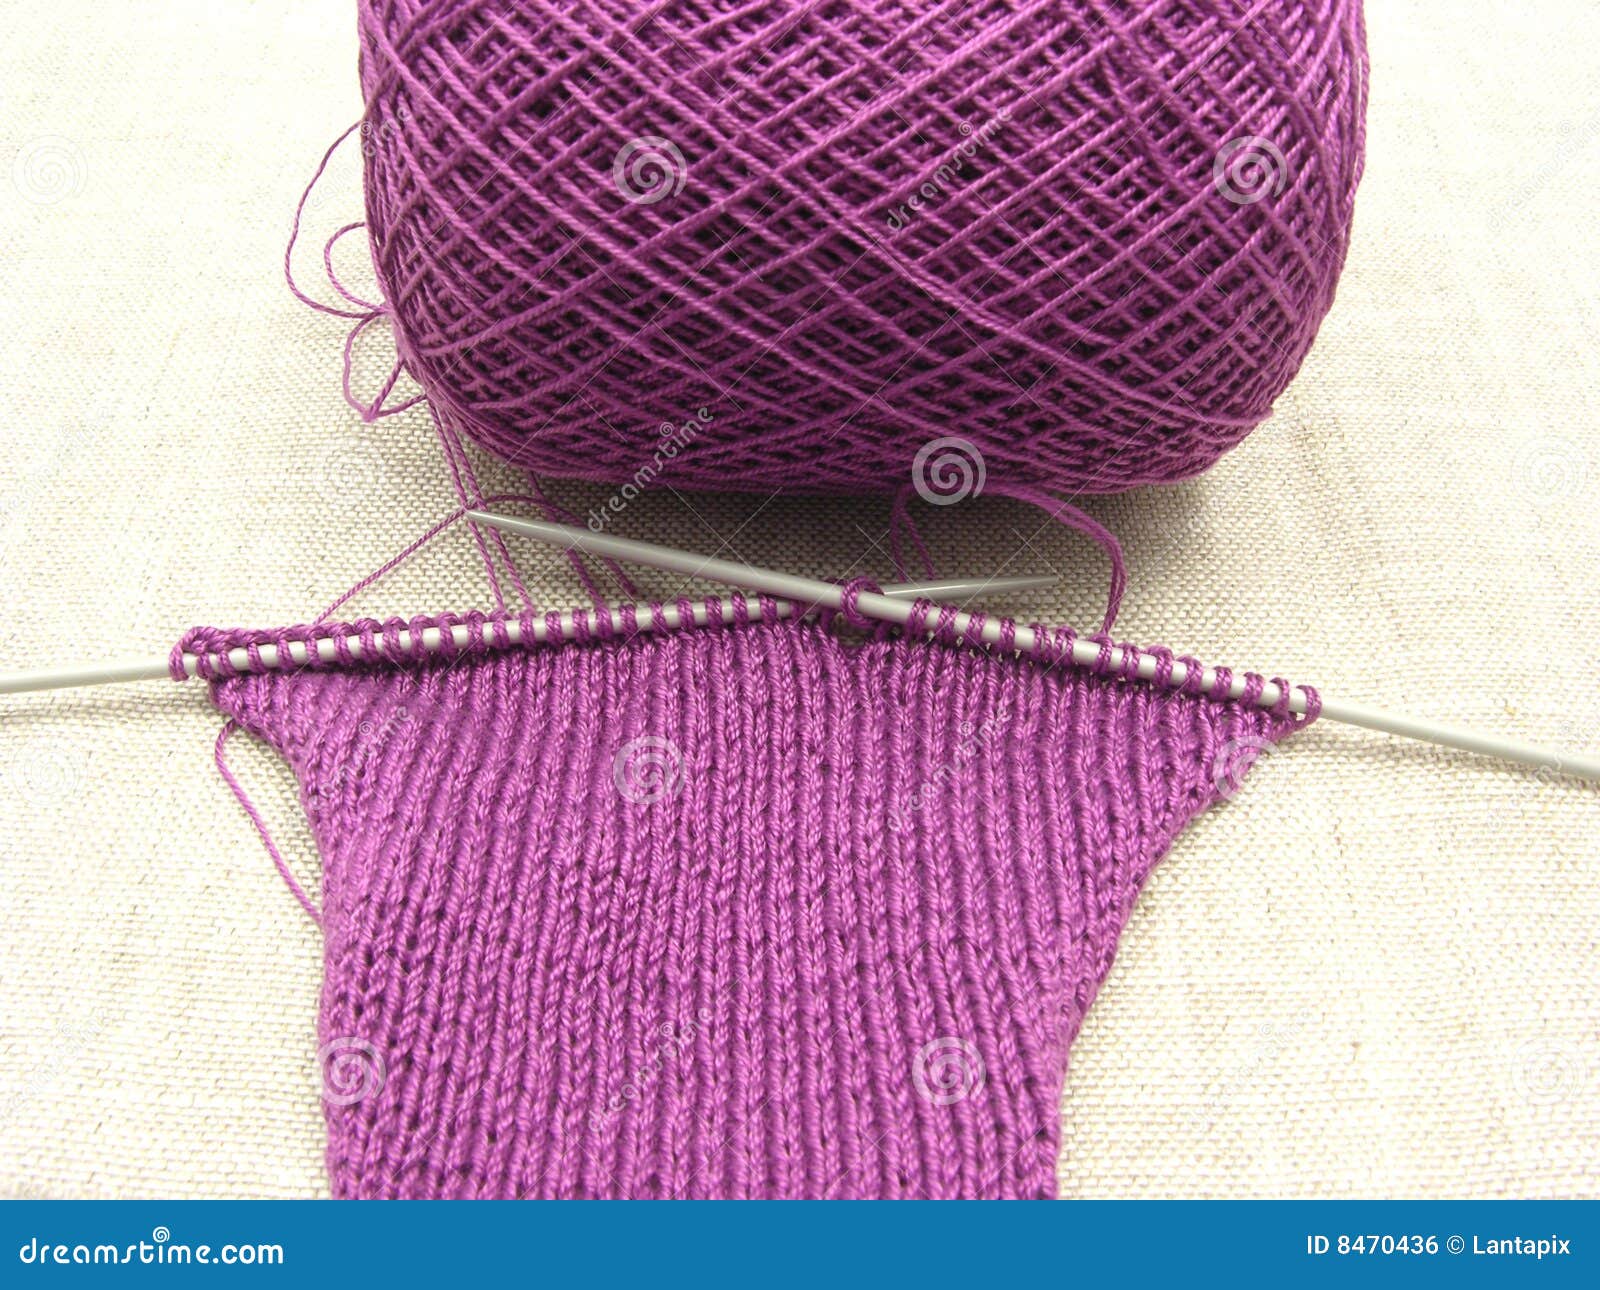 Pink colored knitting stock photo. Image of ball, wool - 8470436